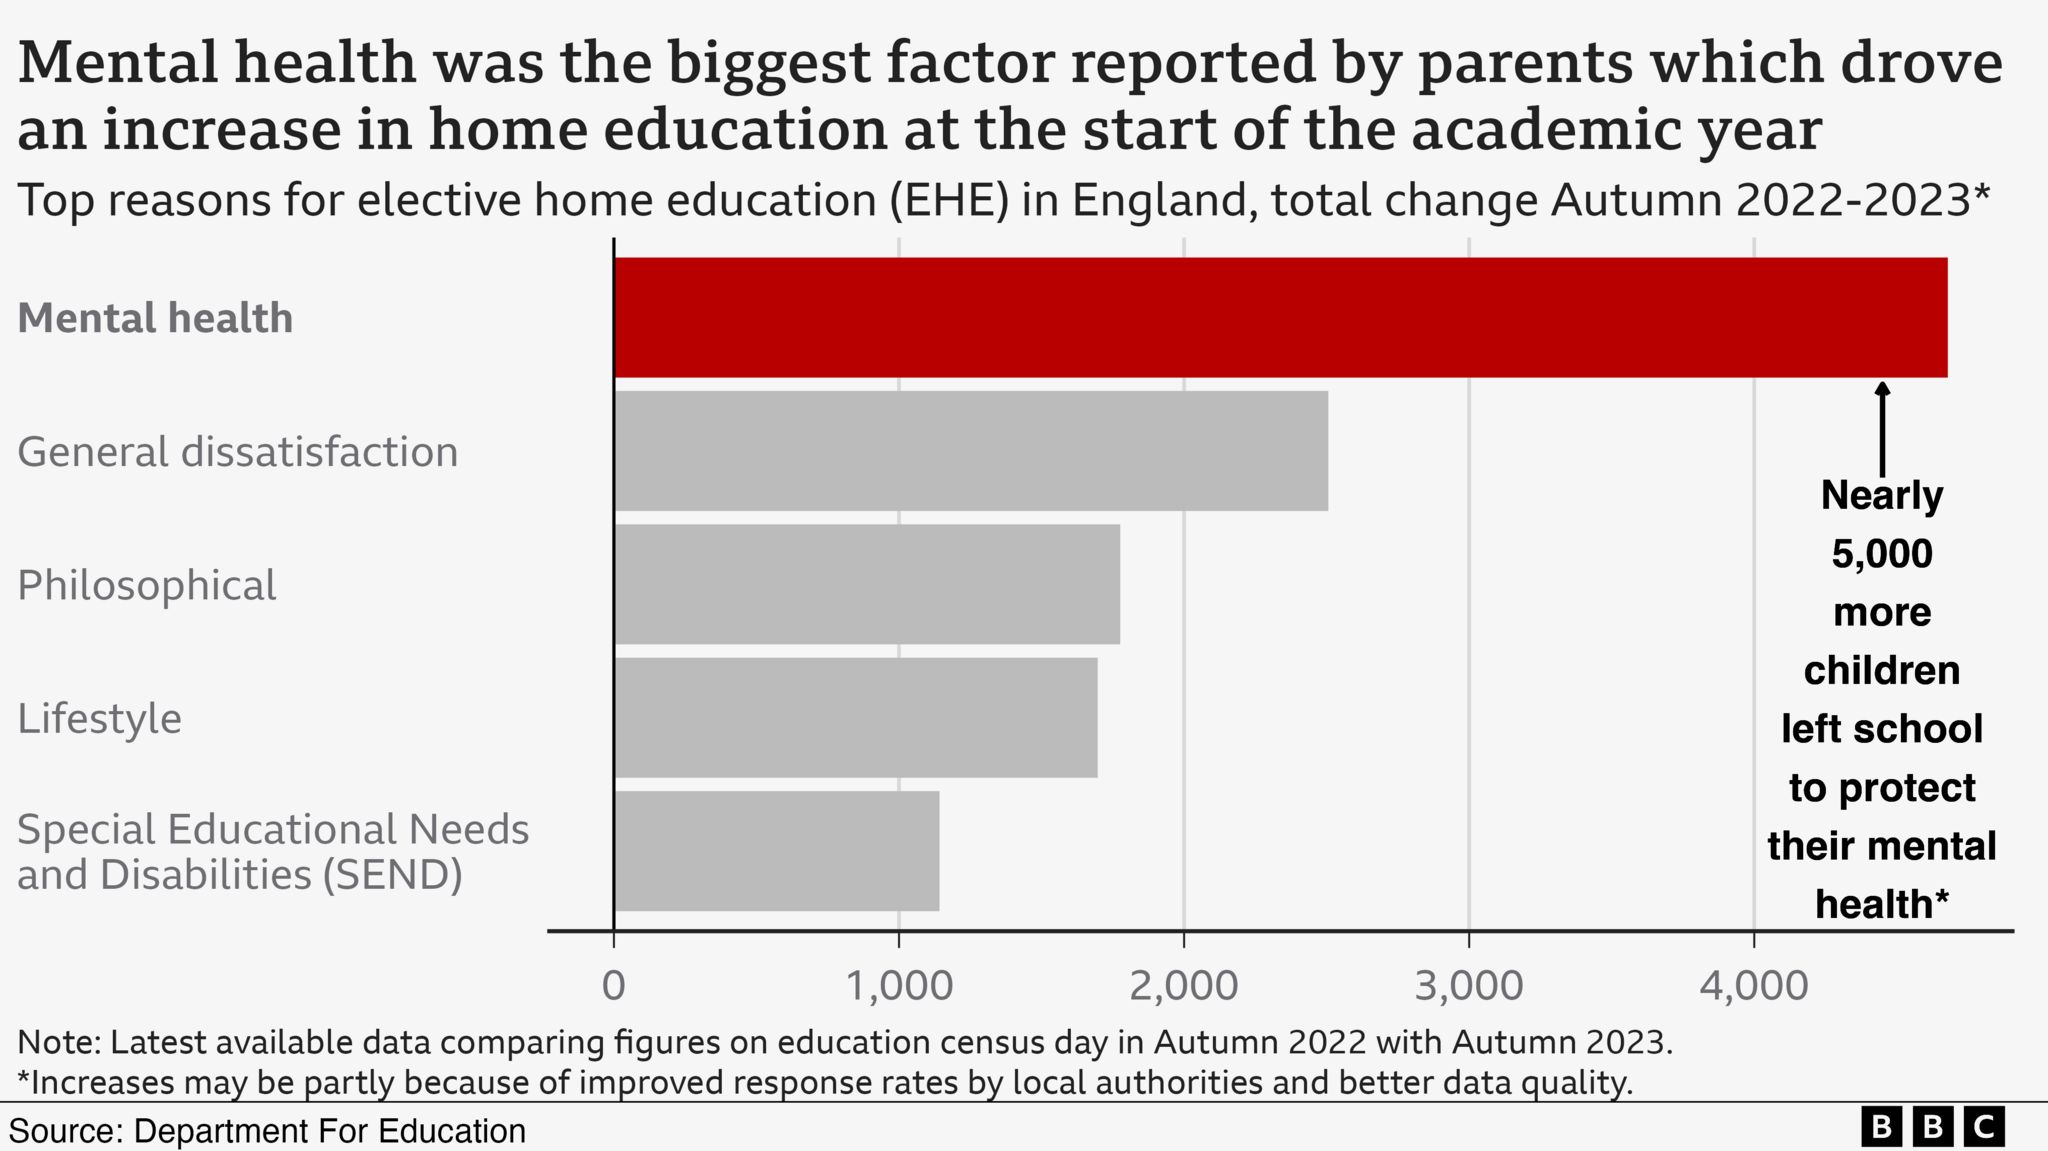 A bar chart showing how mental health was the reason driving the recent increase in elective home education.